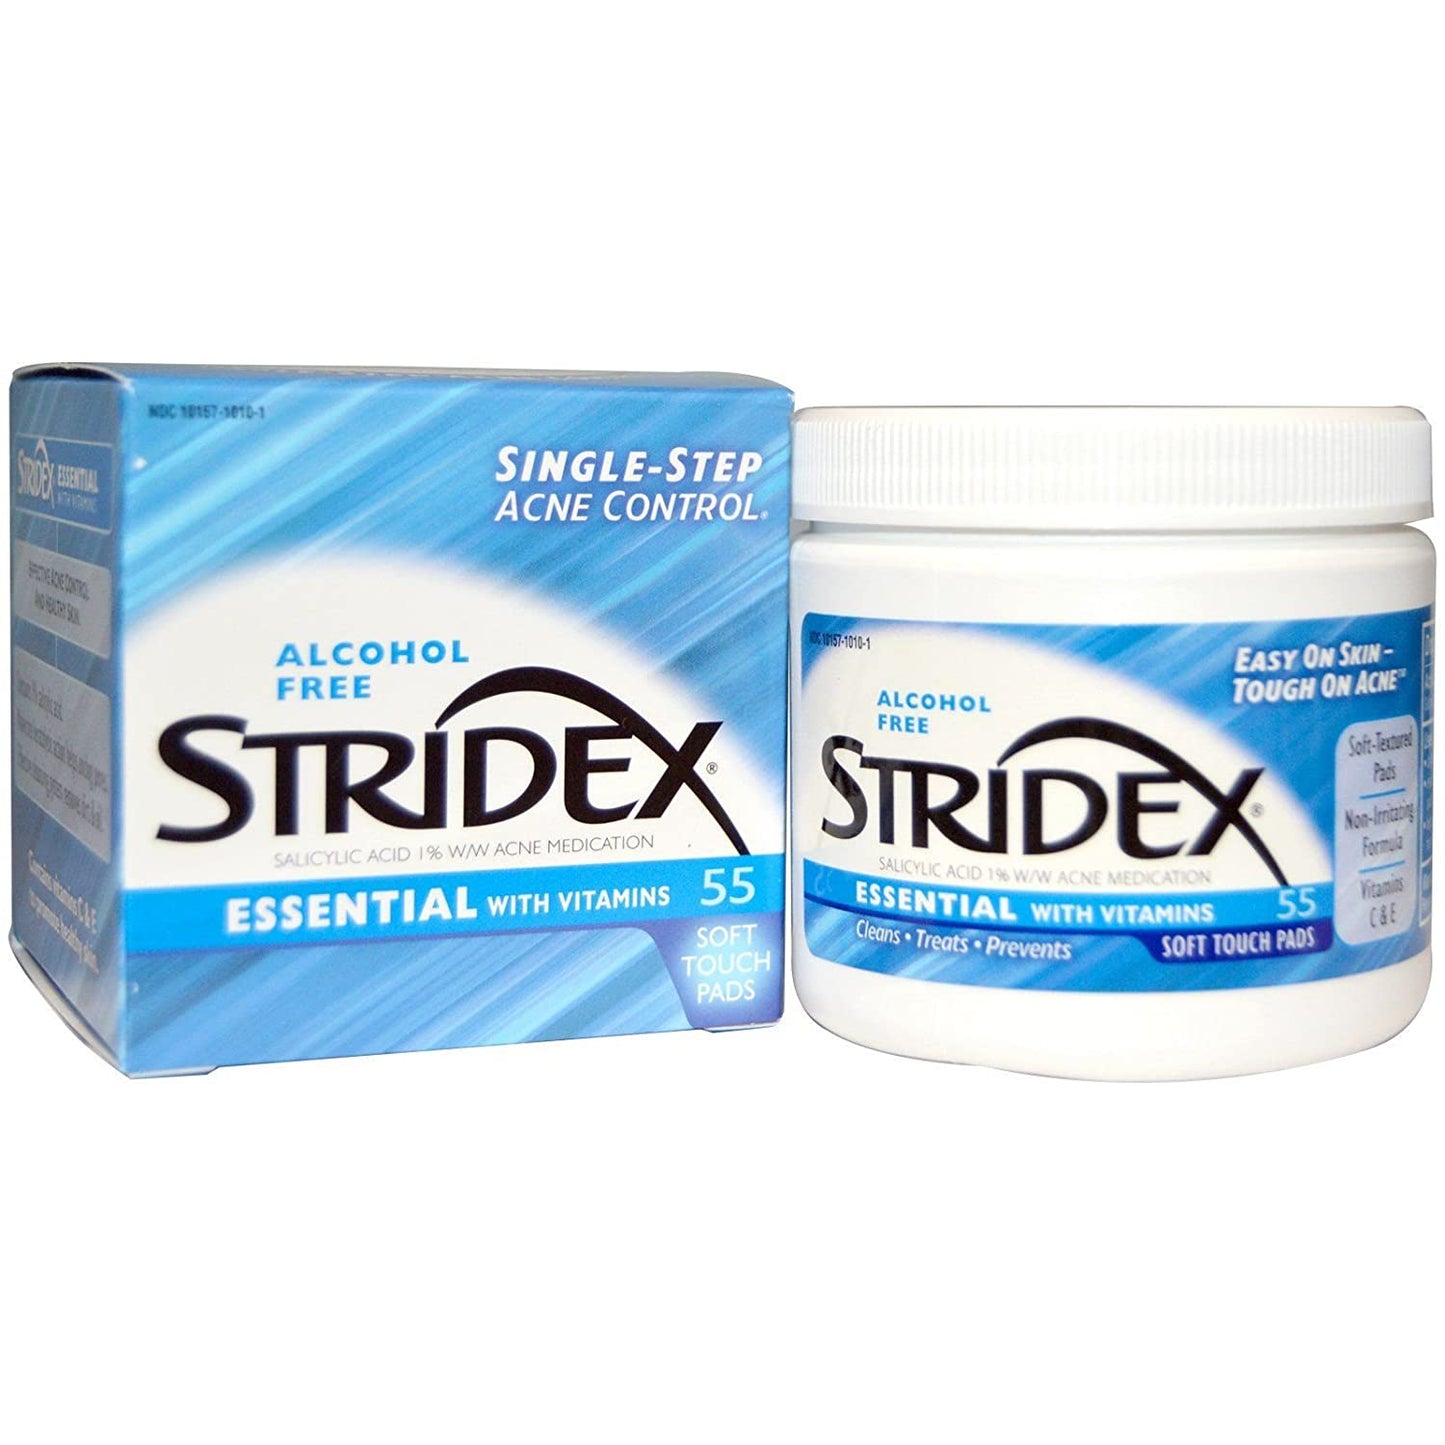 Stridex Essential with Vitamin (blue) 55 Soft Touch Pads (4762821754927)